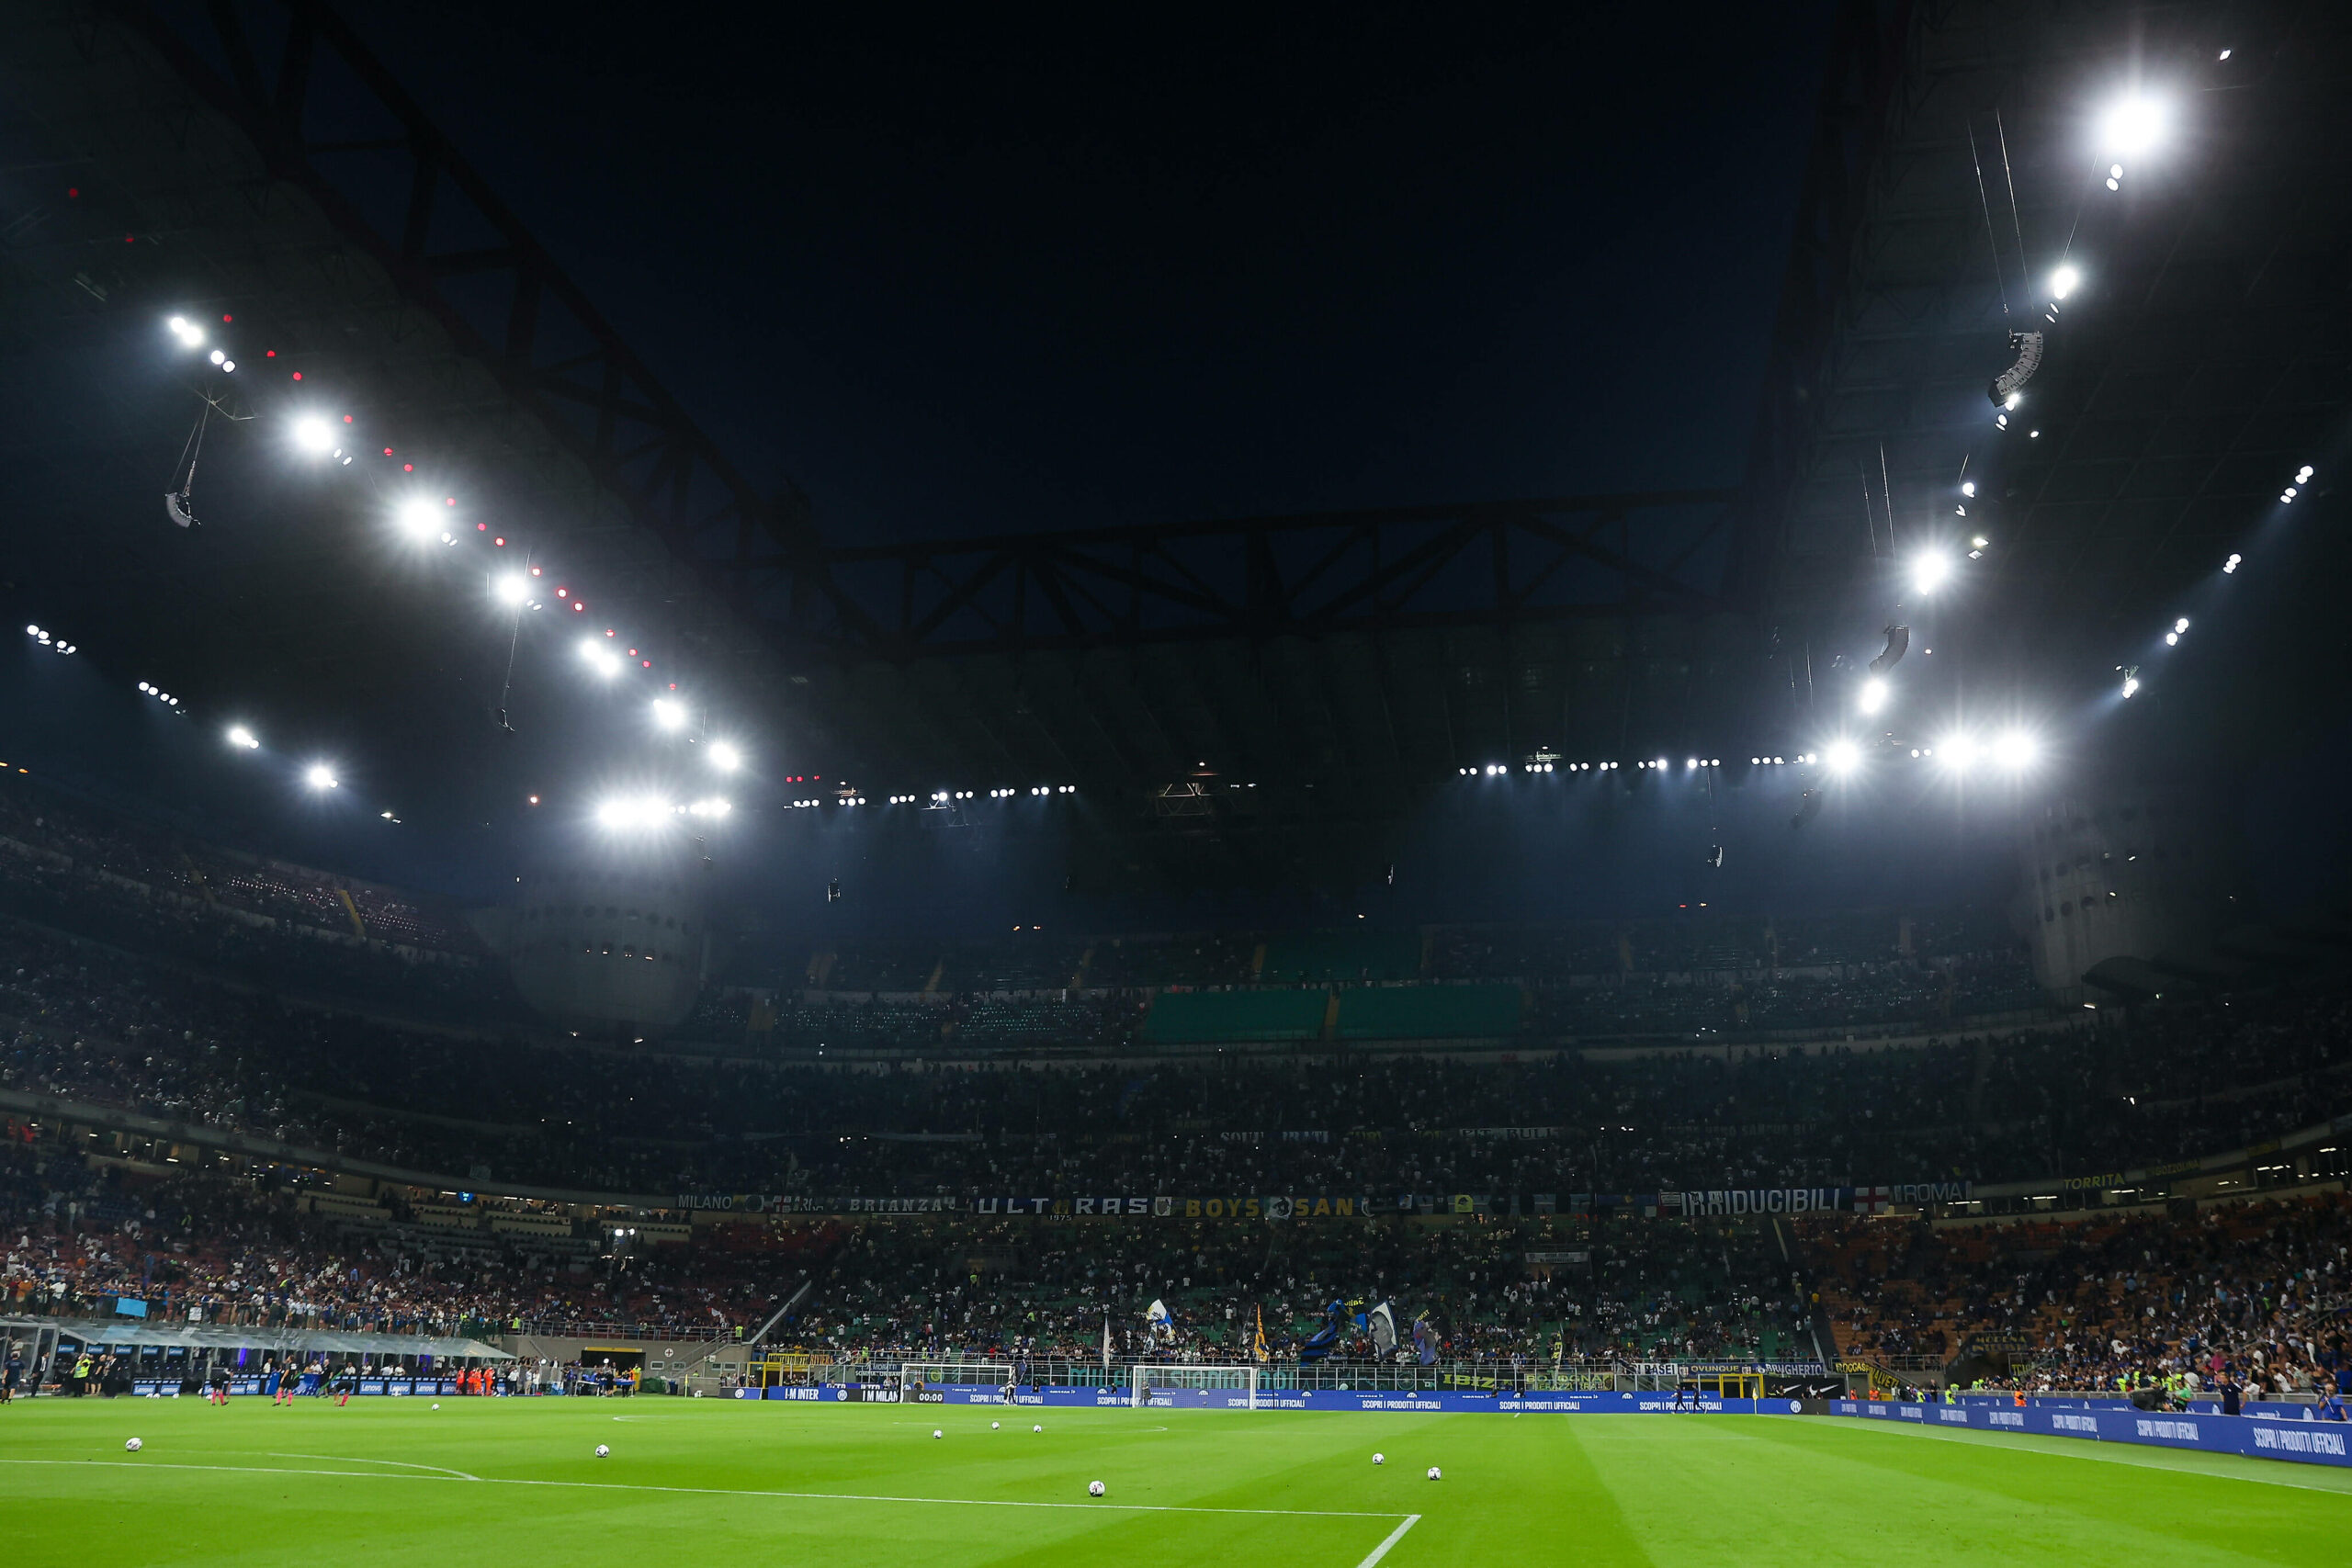 Das Giuseppe-Meazza-Stadion in Mailand